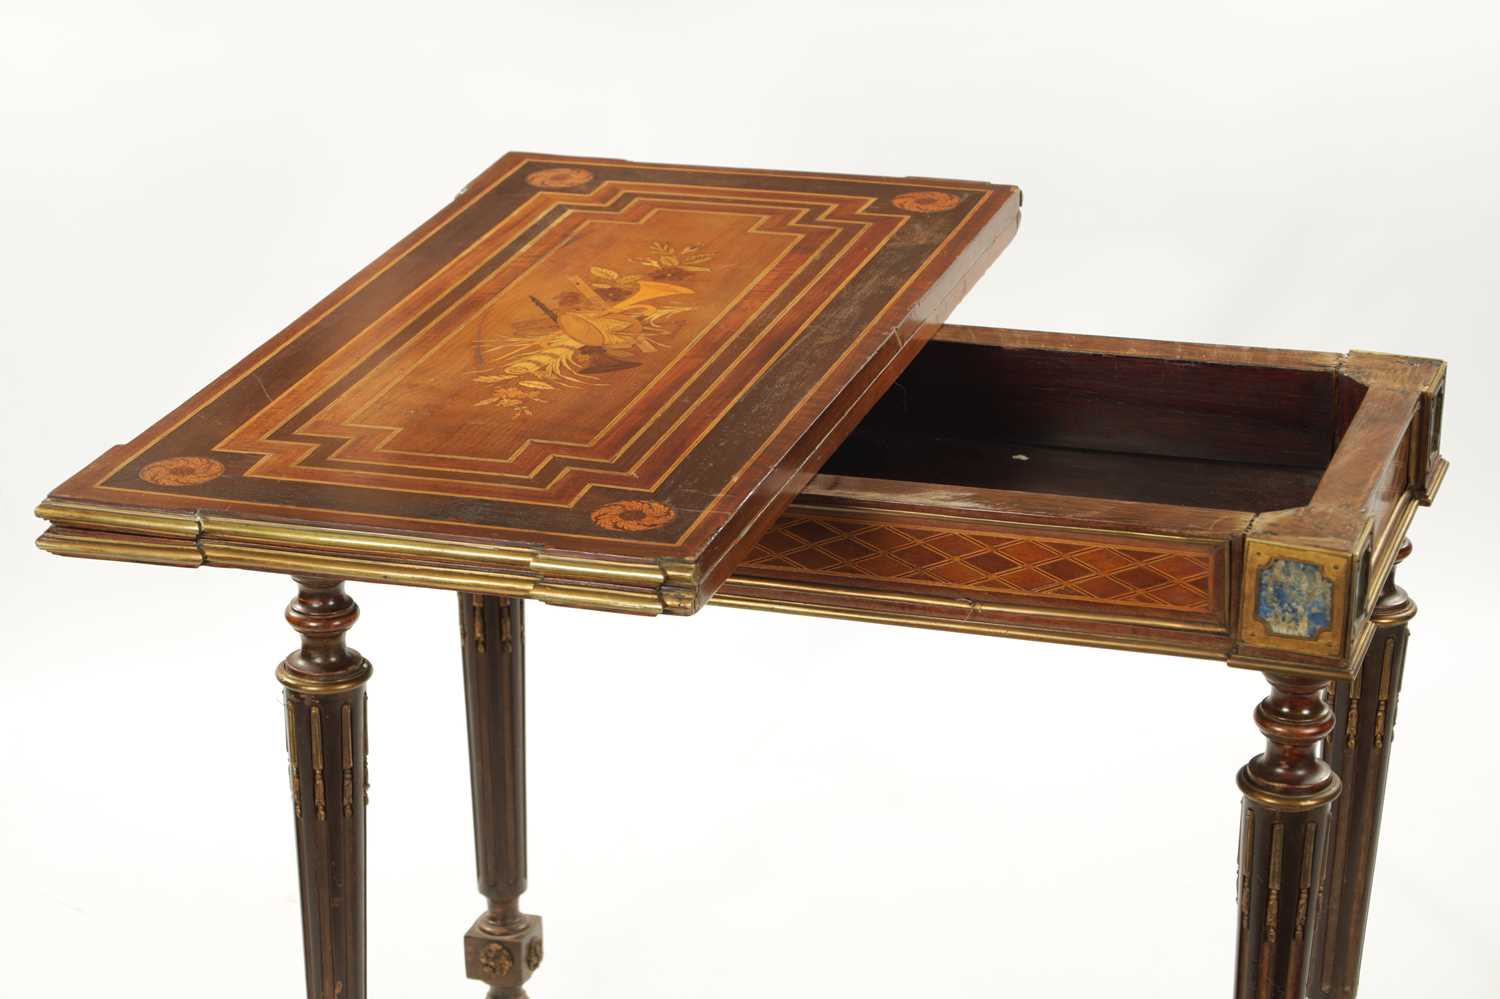 A 19TH CENTURY WALNUT AND ROSEWOOD MARQUETRY INLAID FRENCH CARD TABLE - Image 6 of 7